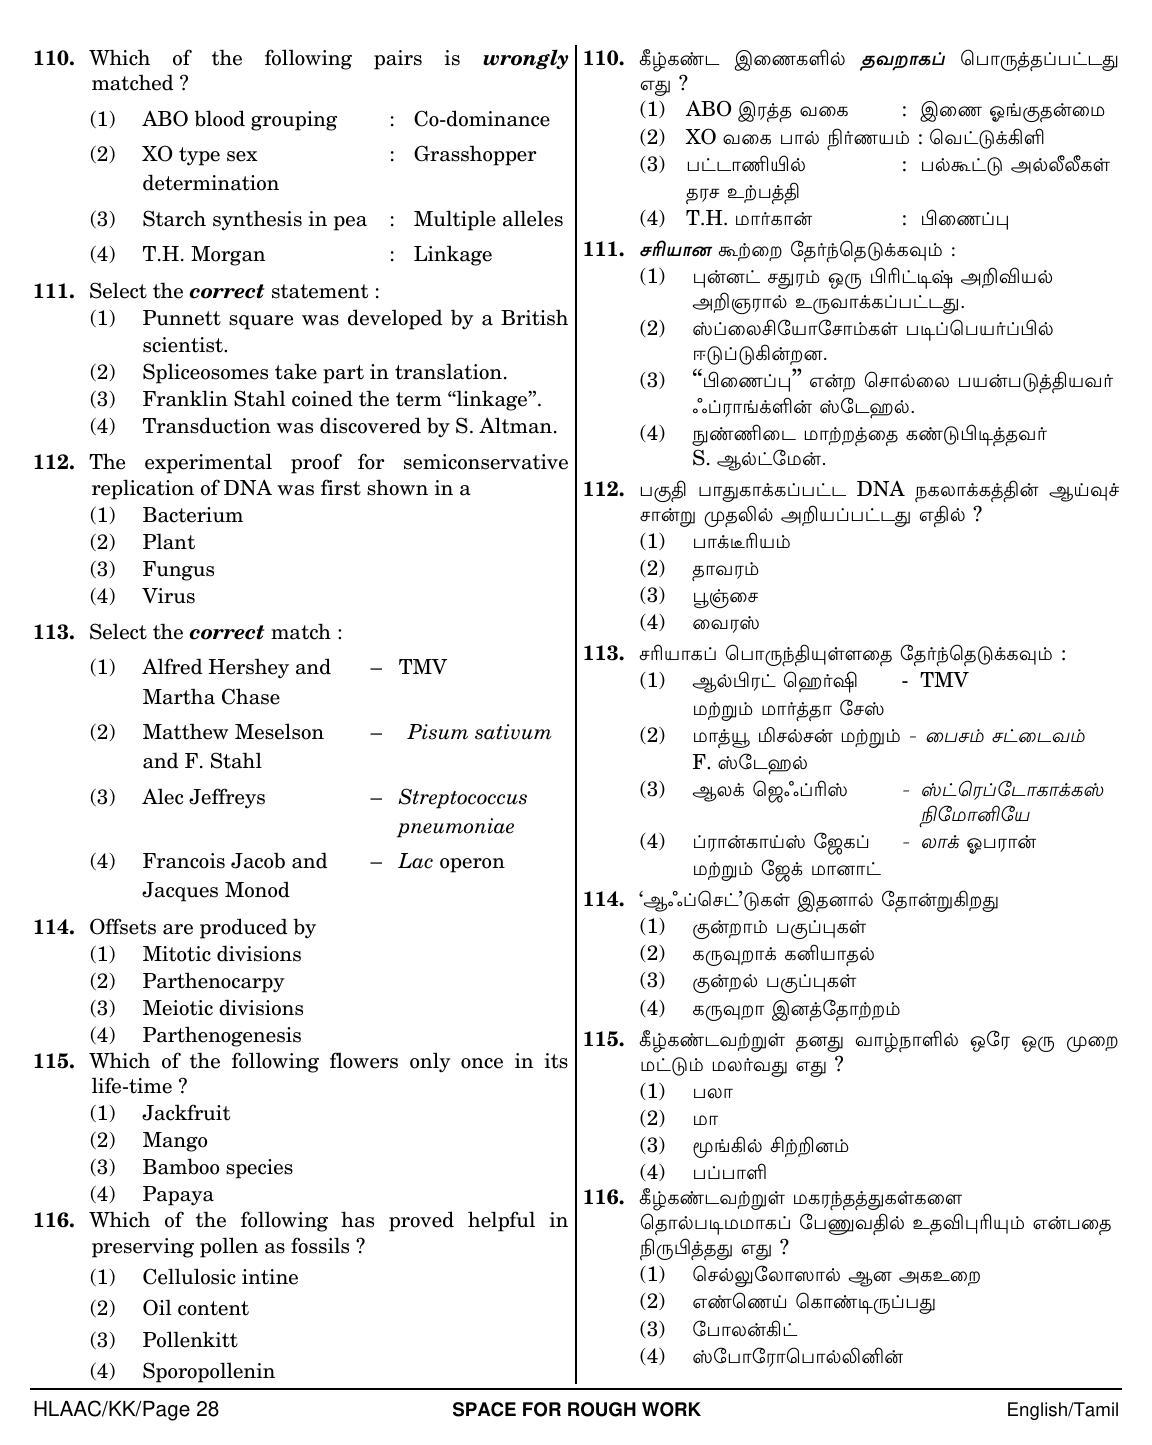 NEET Tamil KK 2018 Question Paper - Page 28